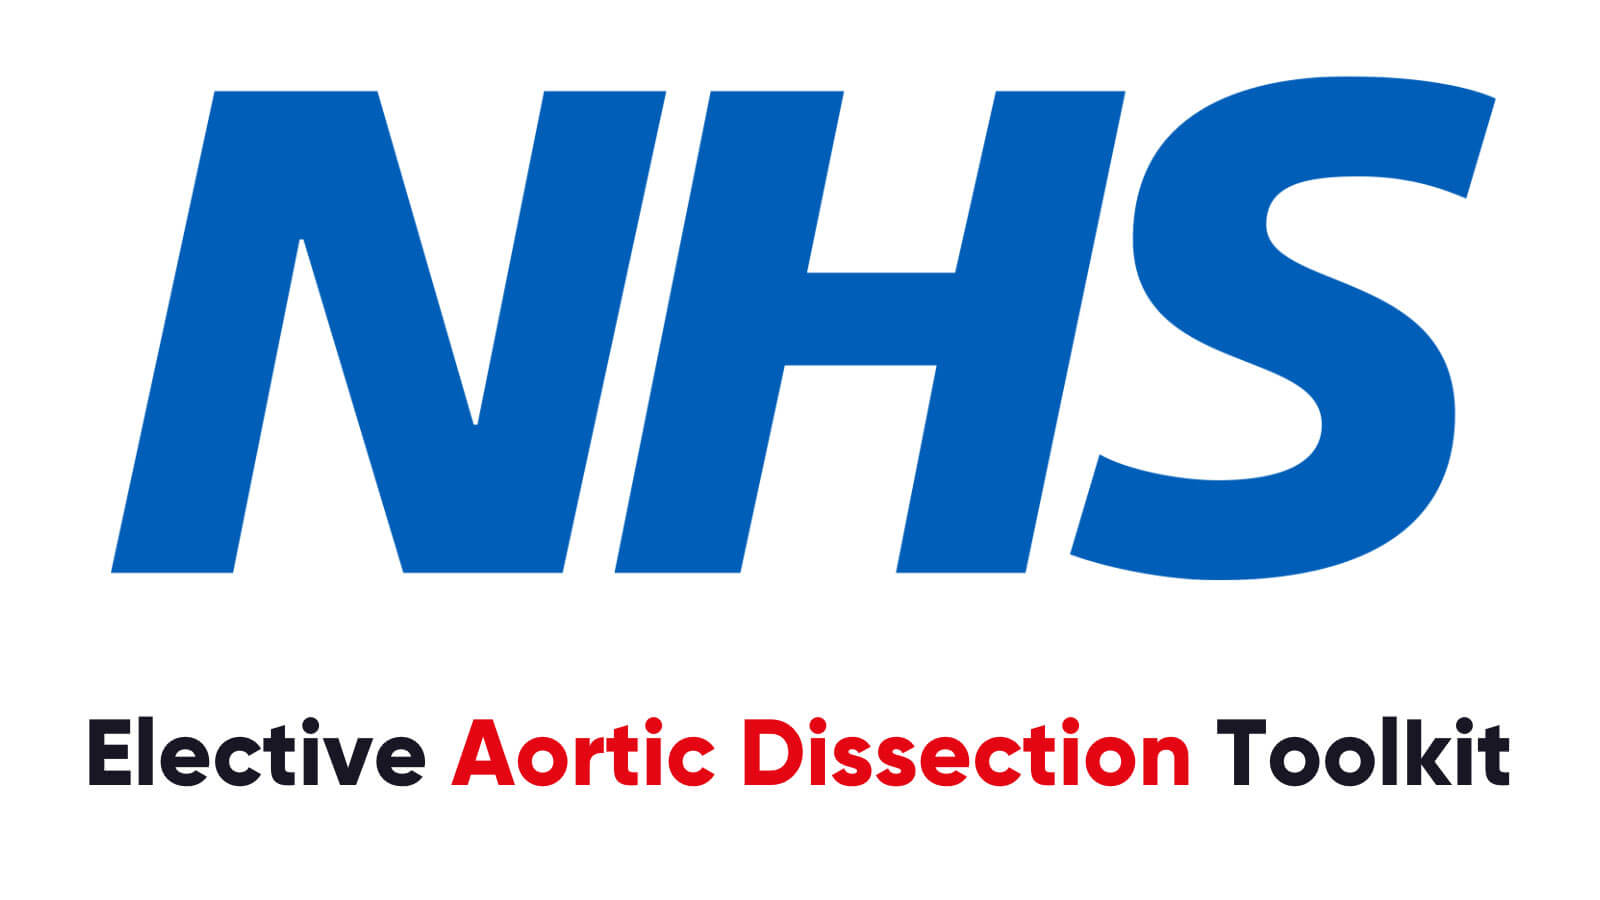 NHS Elective Toolkit a campaign by the UK aortic dissection patient charity